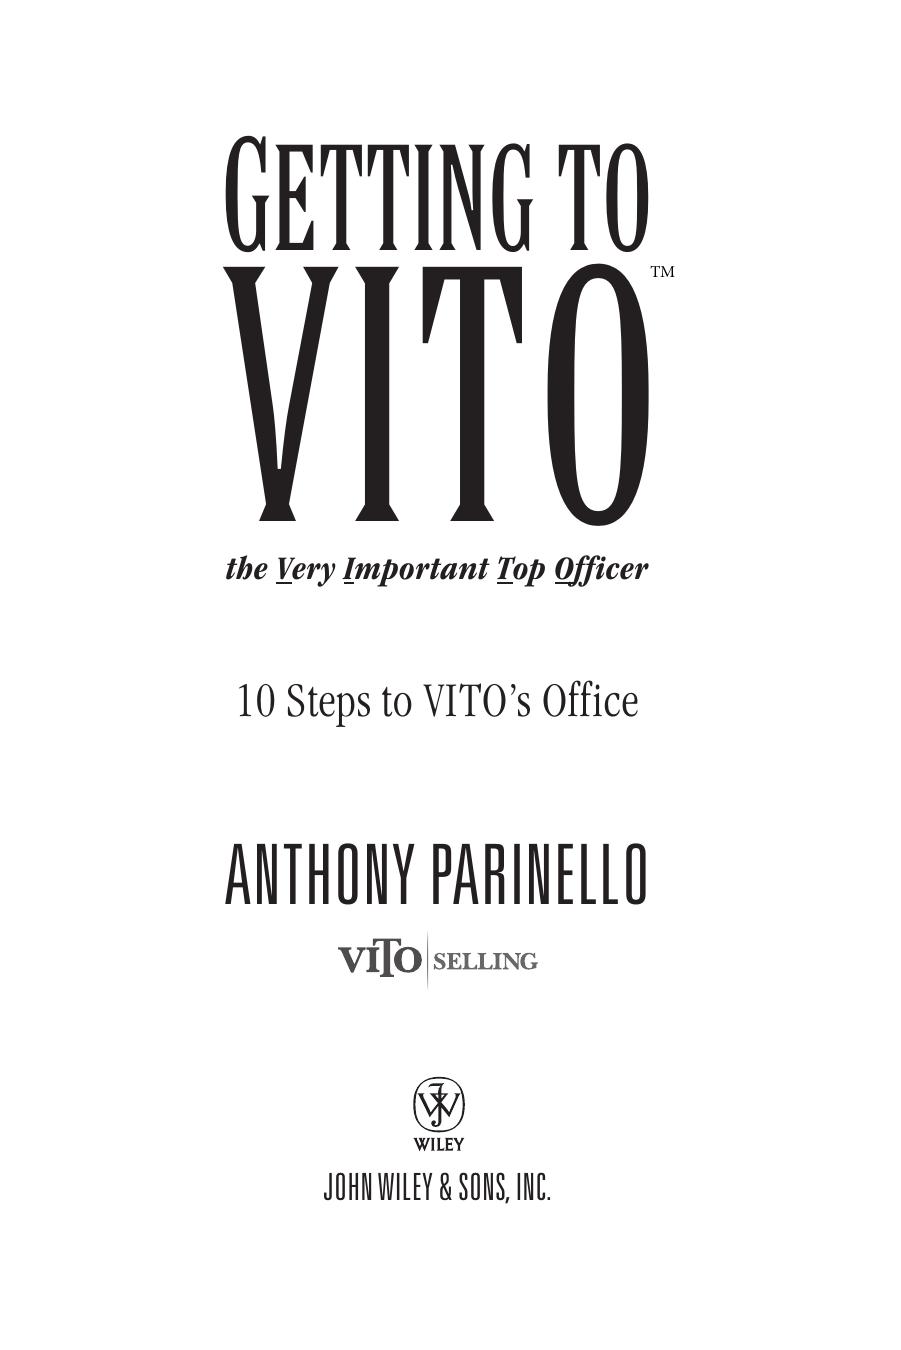 Getting to VITO (The Very Important Top Officer): 10 Steps to VITO's Office by Anthony Parinello